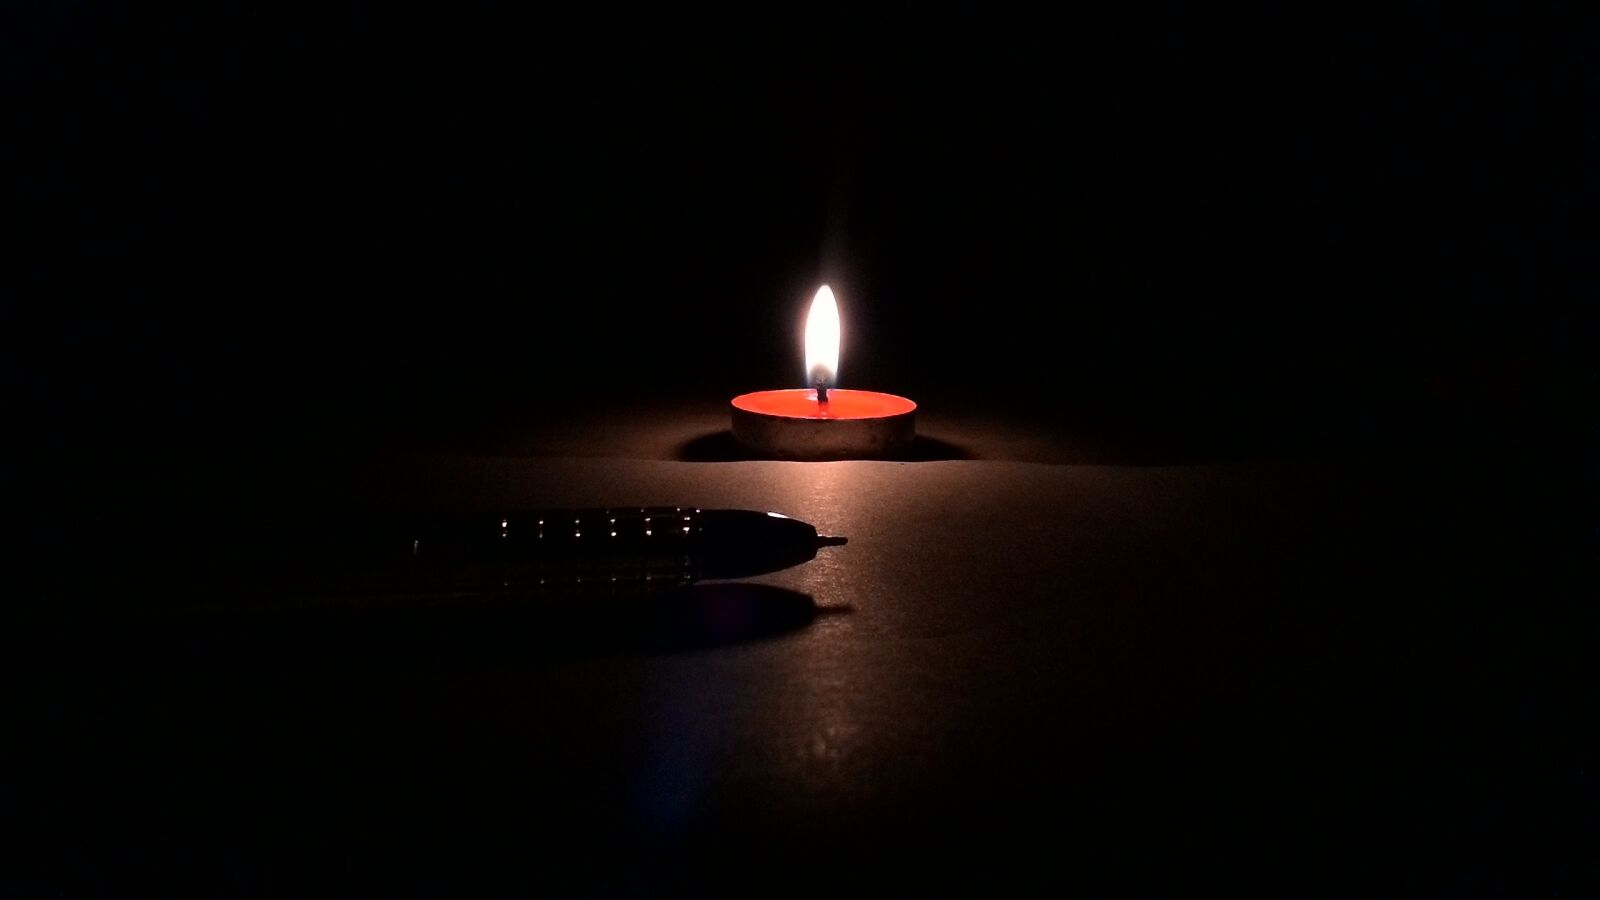 ASUS Z007 sample photo. Light, candle, pen photography